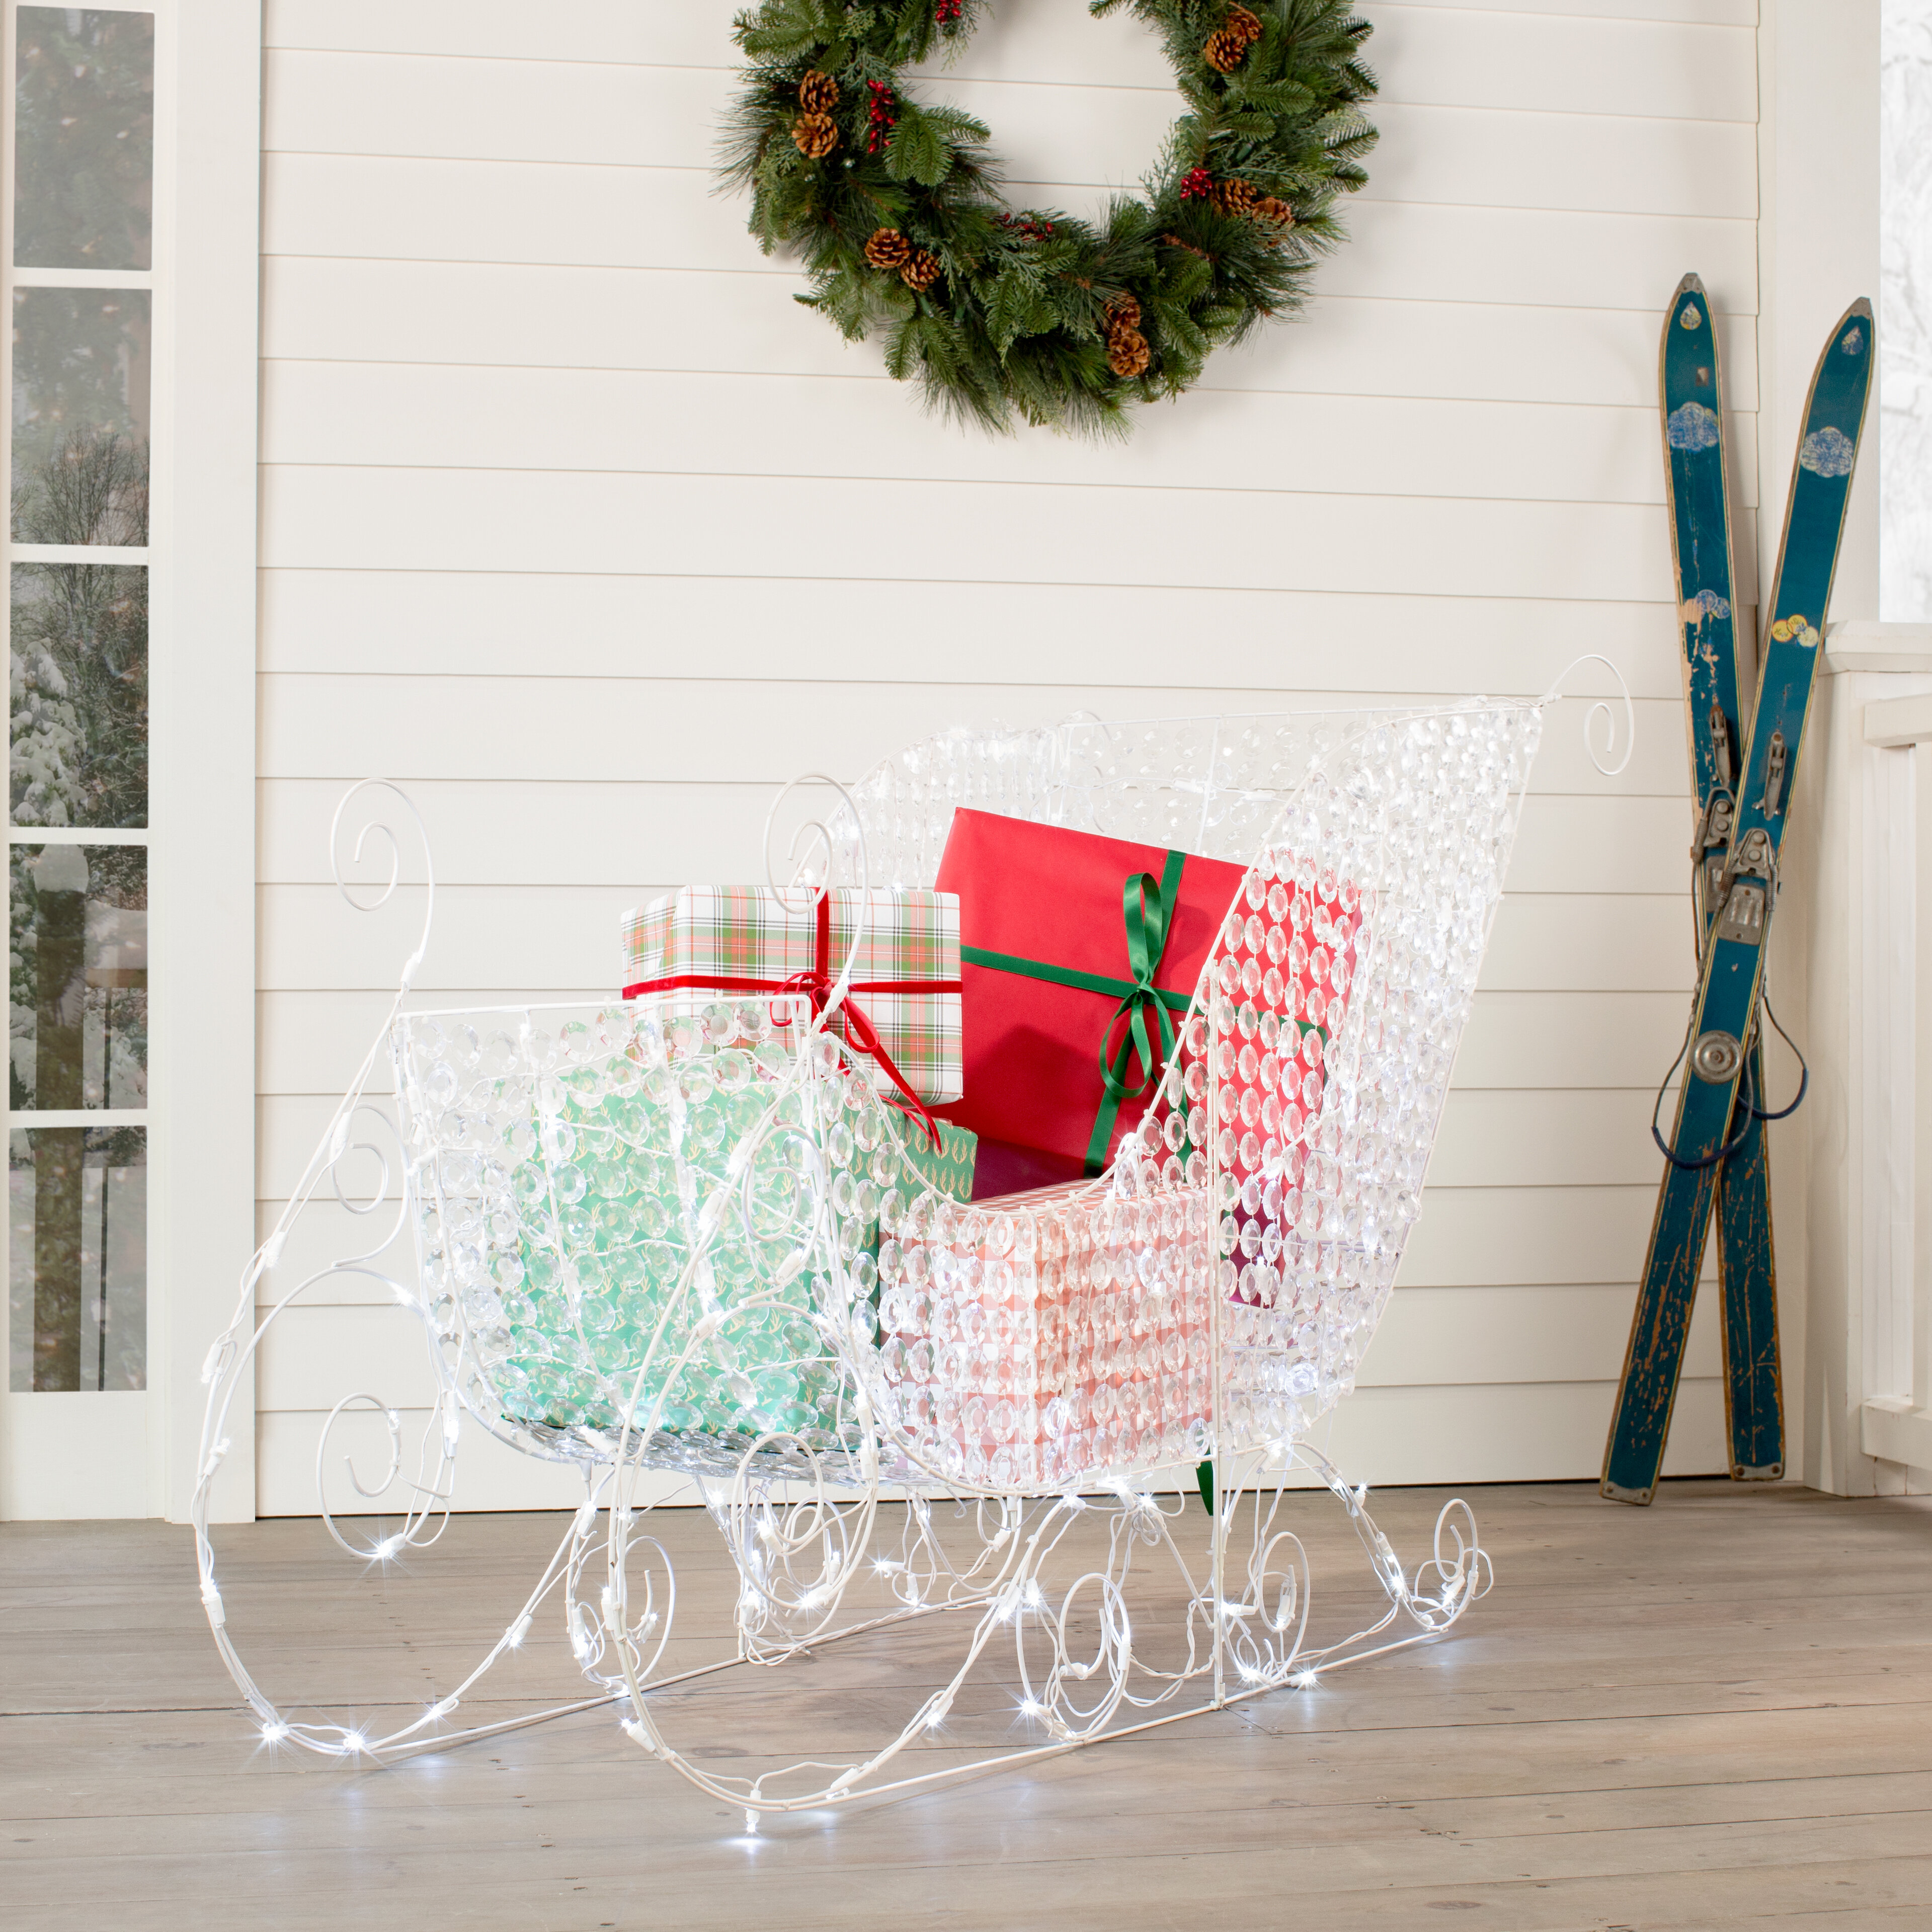 It's Written on the Wall: 286 Neighbor Christmas Gift Ideas-It's All Here!